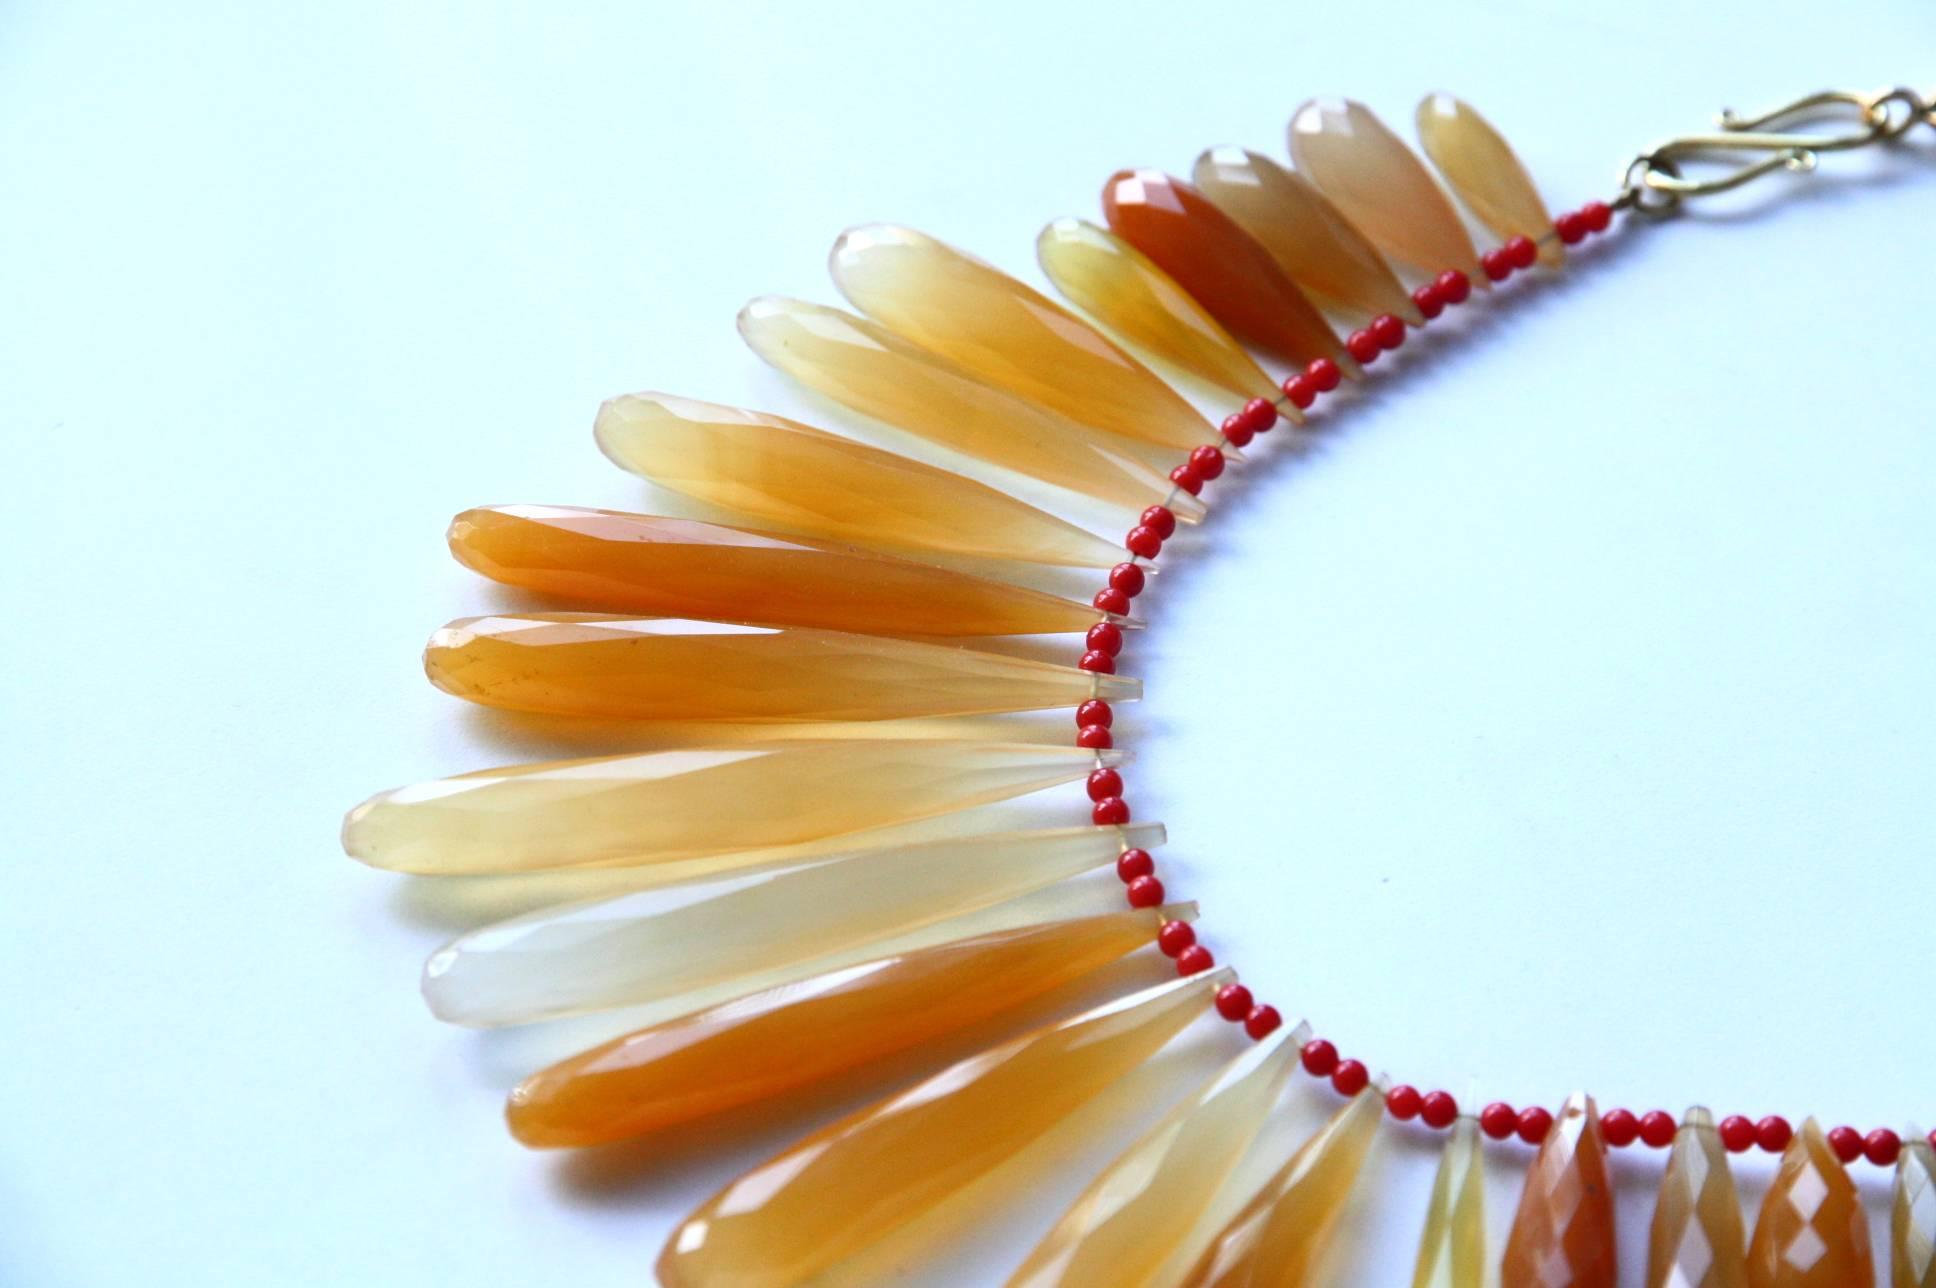 Red Italian Coral fantastic orange Chalcedony Faced Drops Gold 18kt gr 8,90.
All Giulia Colussi jewelry is new and has never been previously owned or worn. Each item will arrive at your door beautifully gift wrapped in our boxes, put inside an